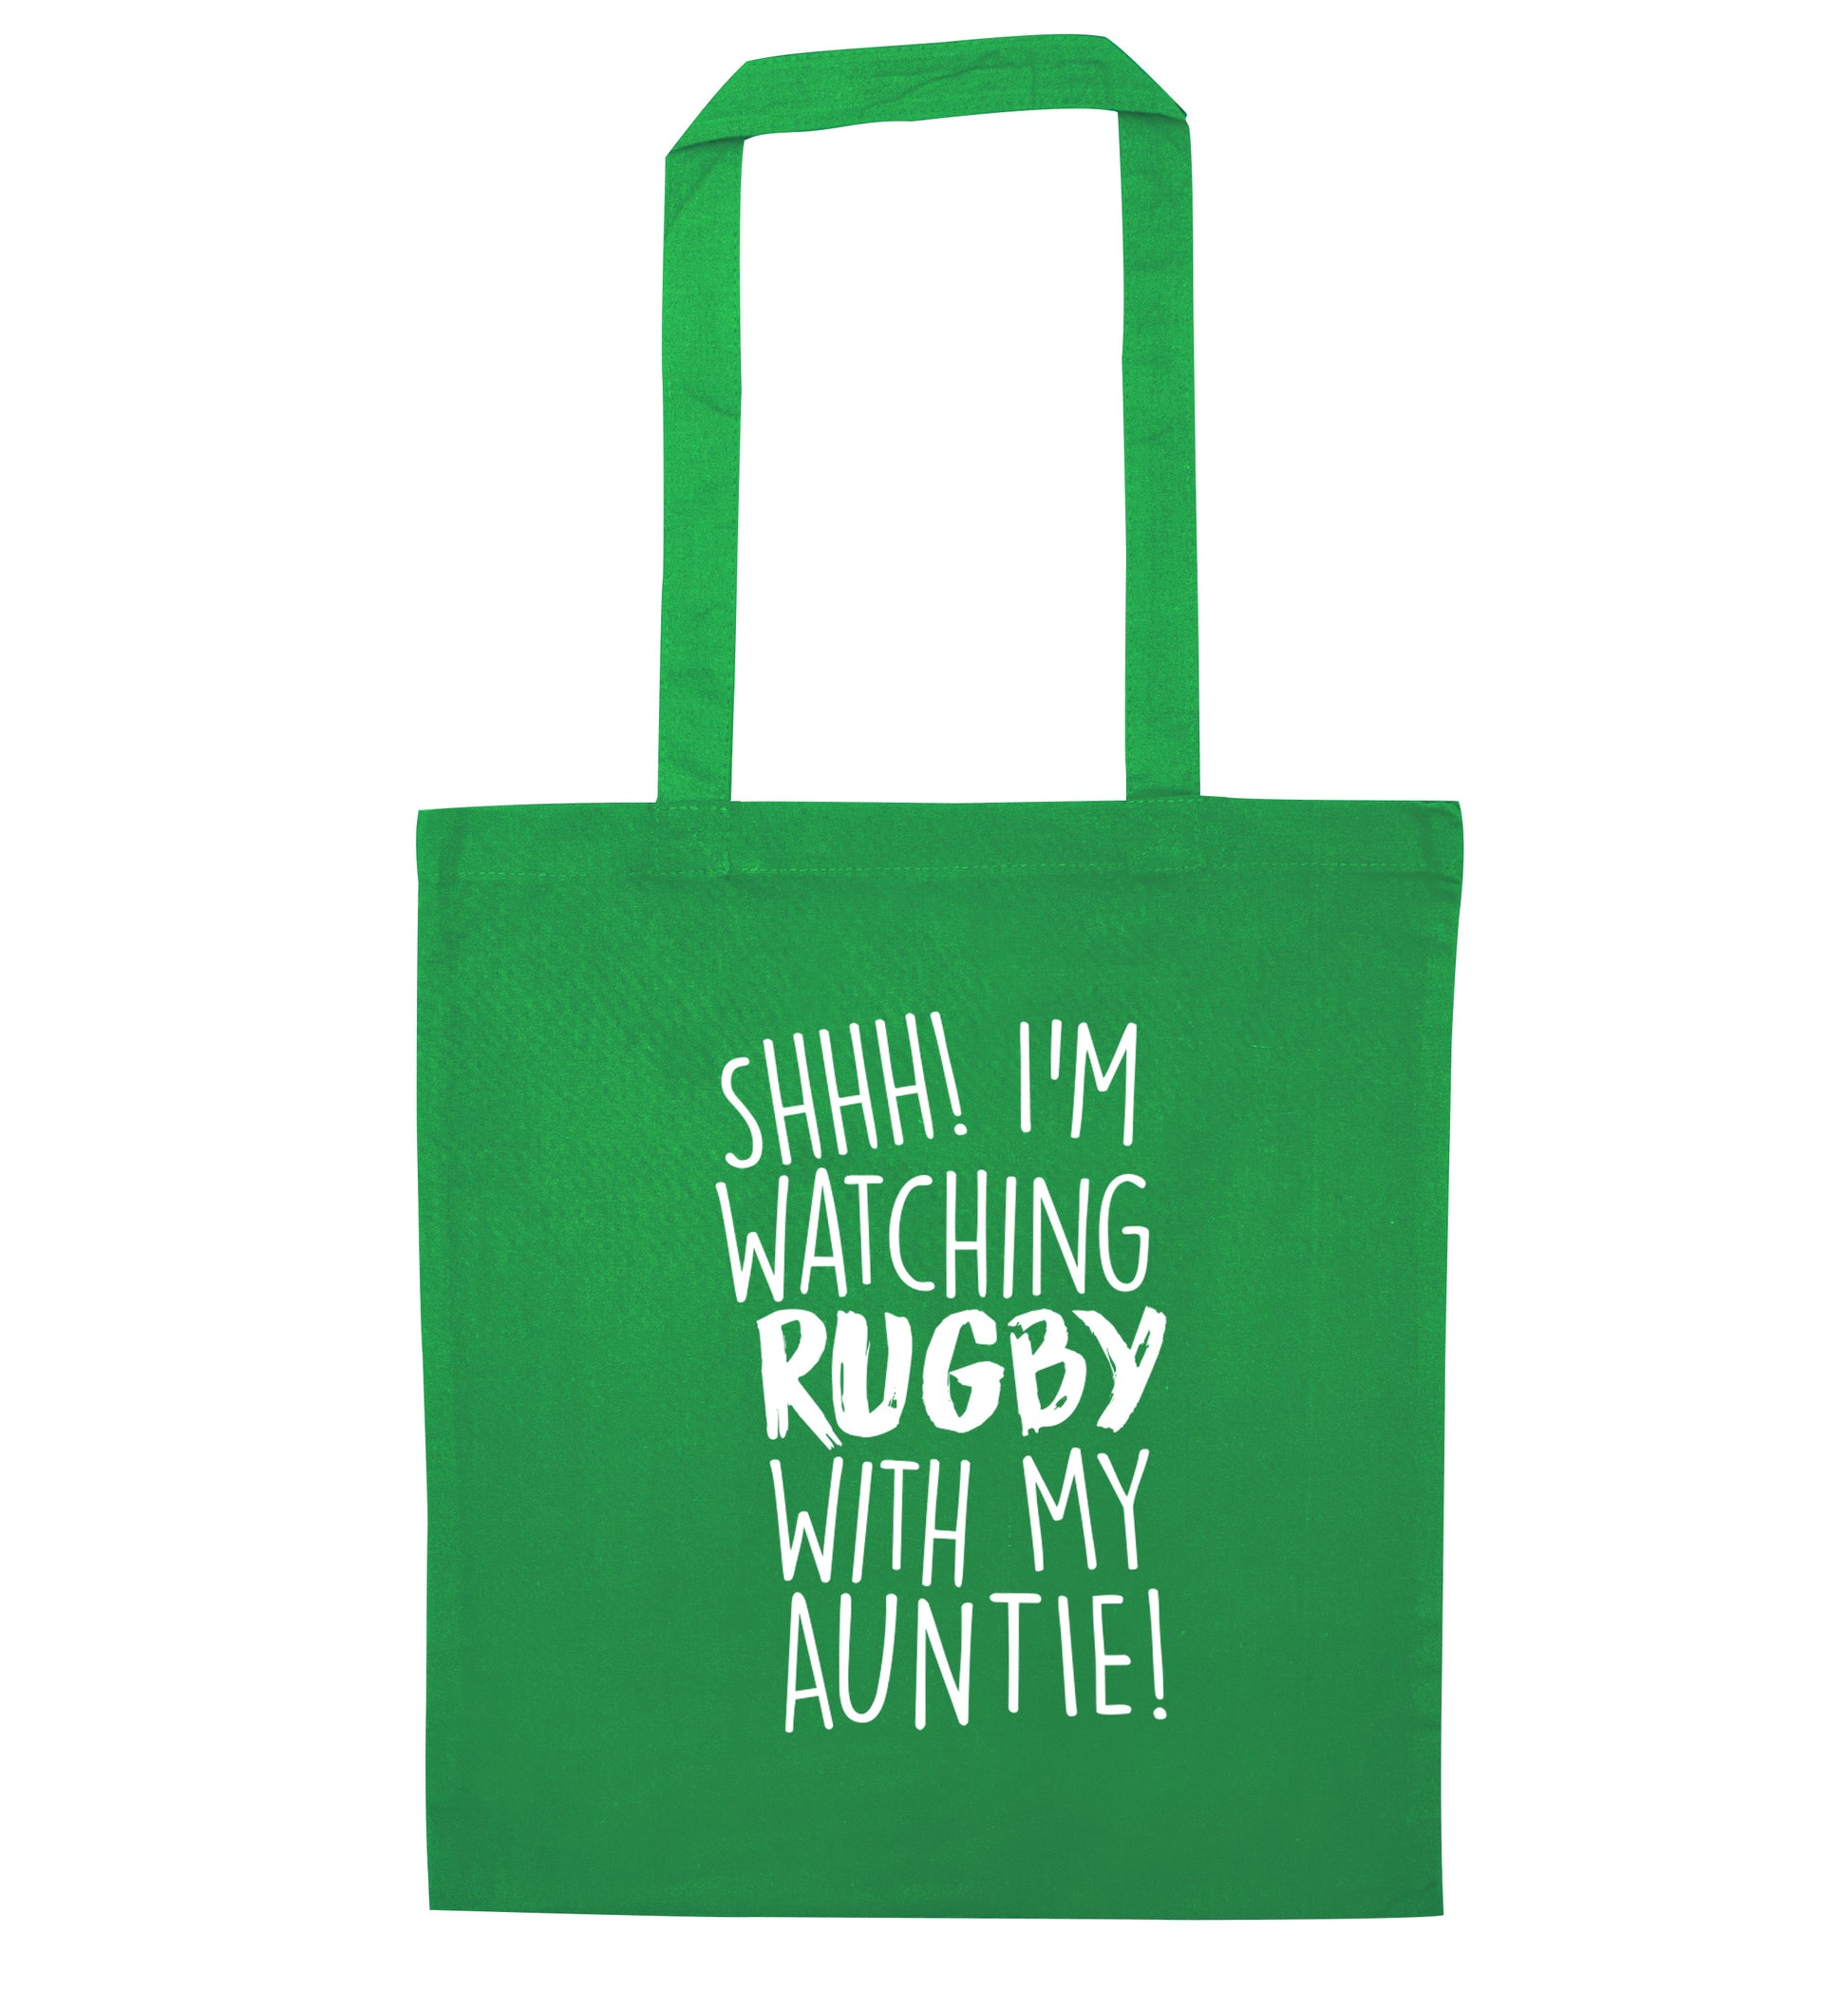 Shhh I'm watchin rugby with my auntie green tote bag